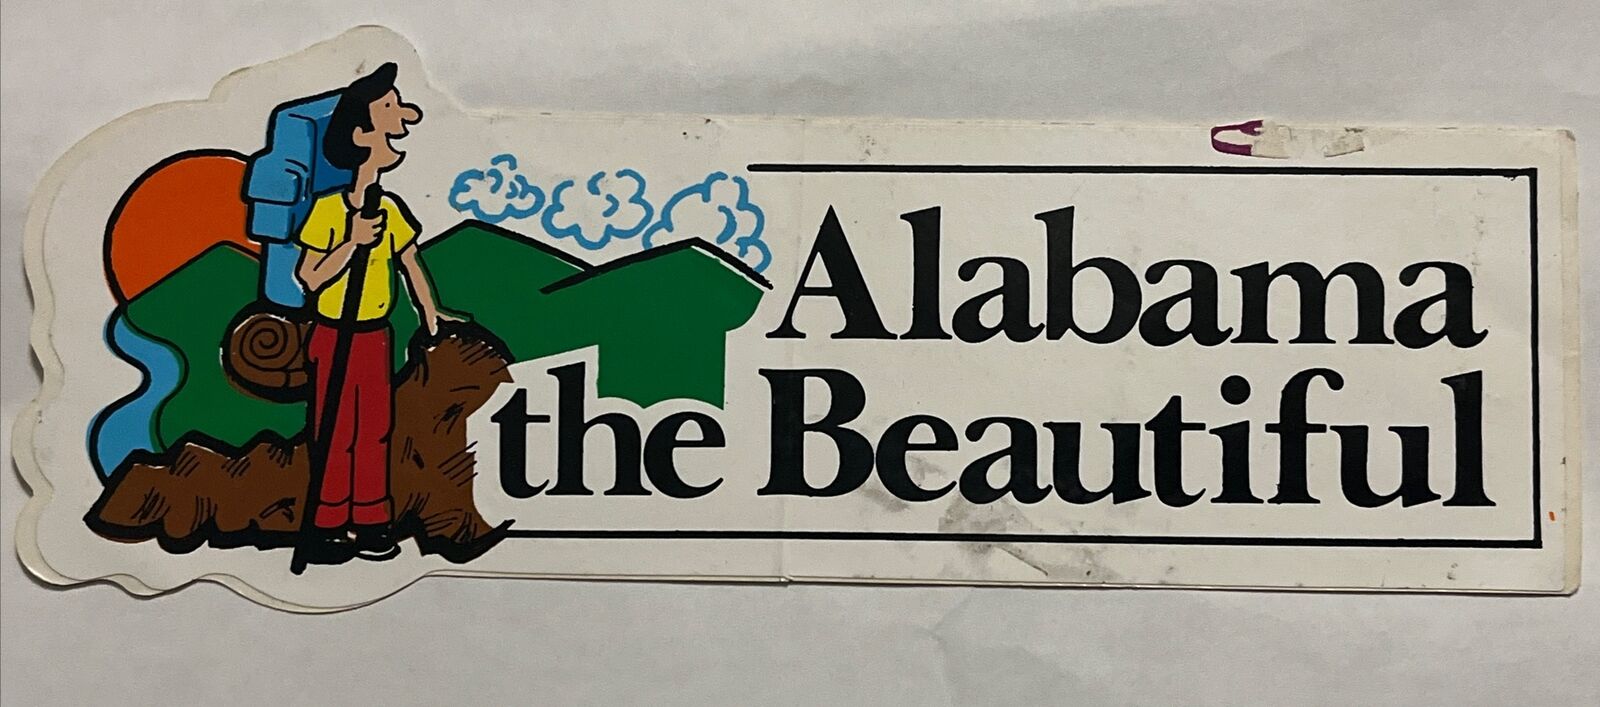 Vintage Alabama the Beautiful - Car Bumper Sticker - 70’s 1970’s - NEW OLD STOCK